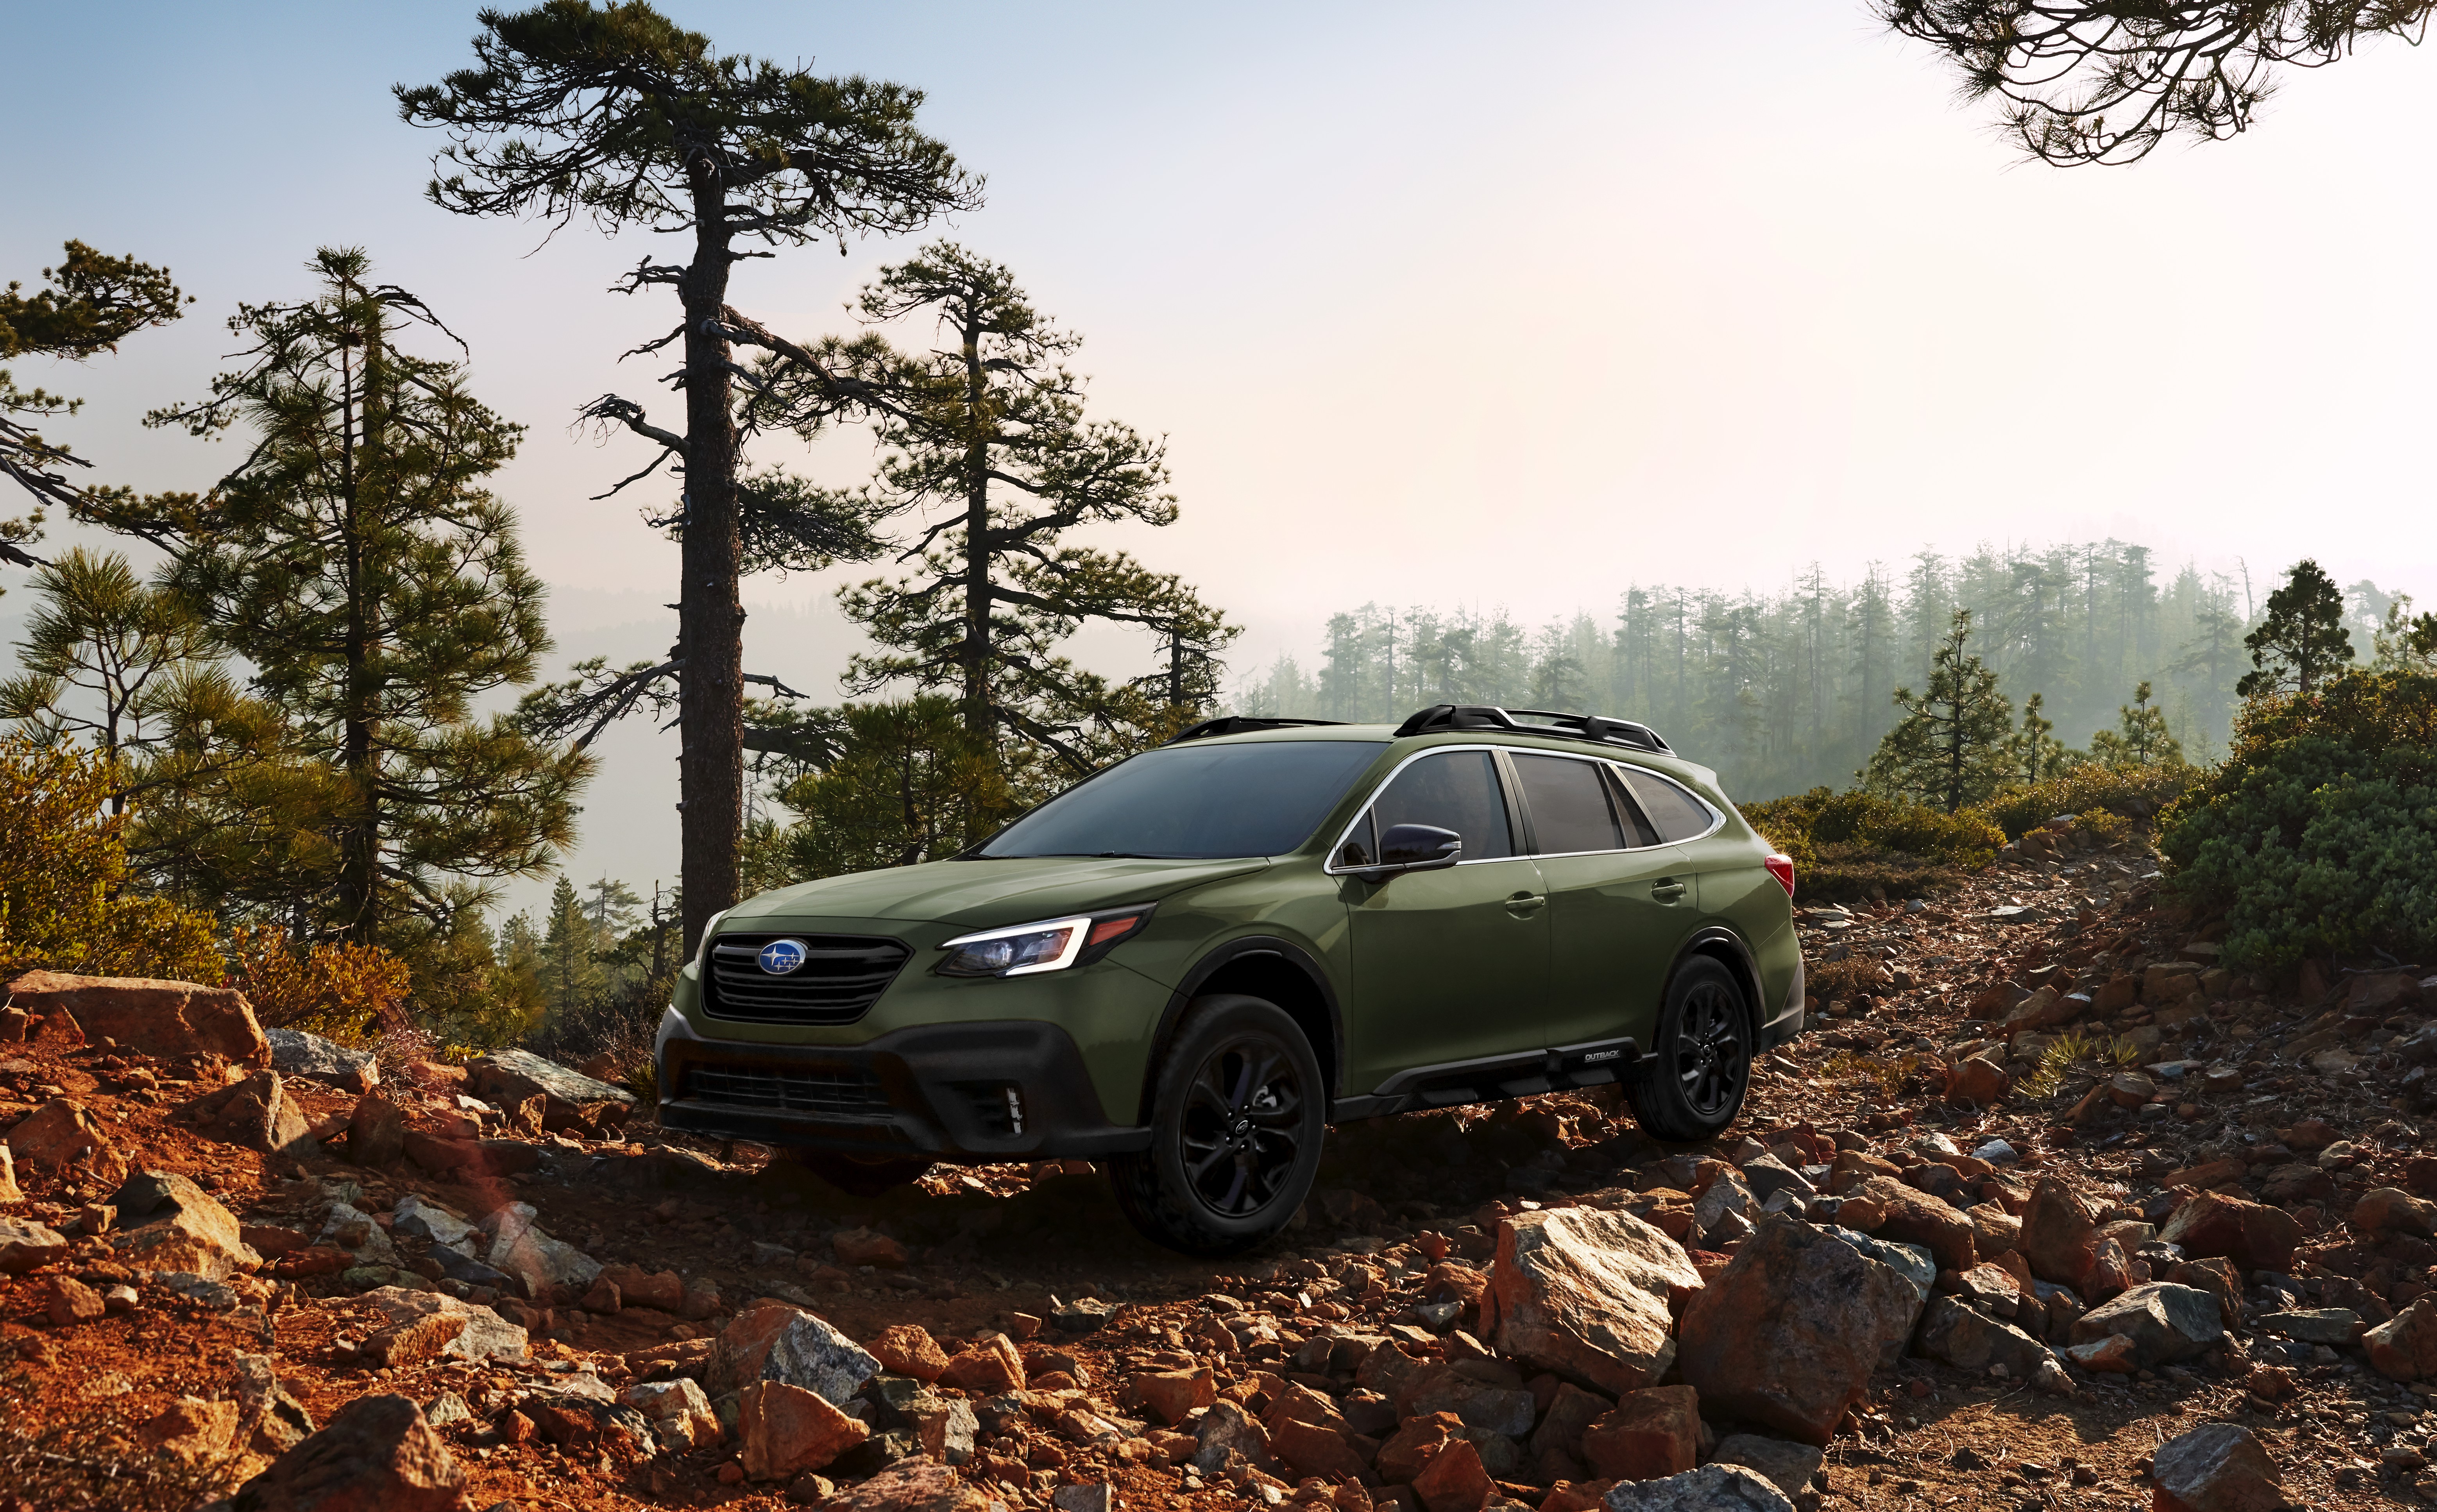 A 2020 Subaru Outback parked off-roading in a forest.